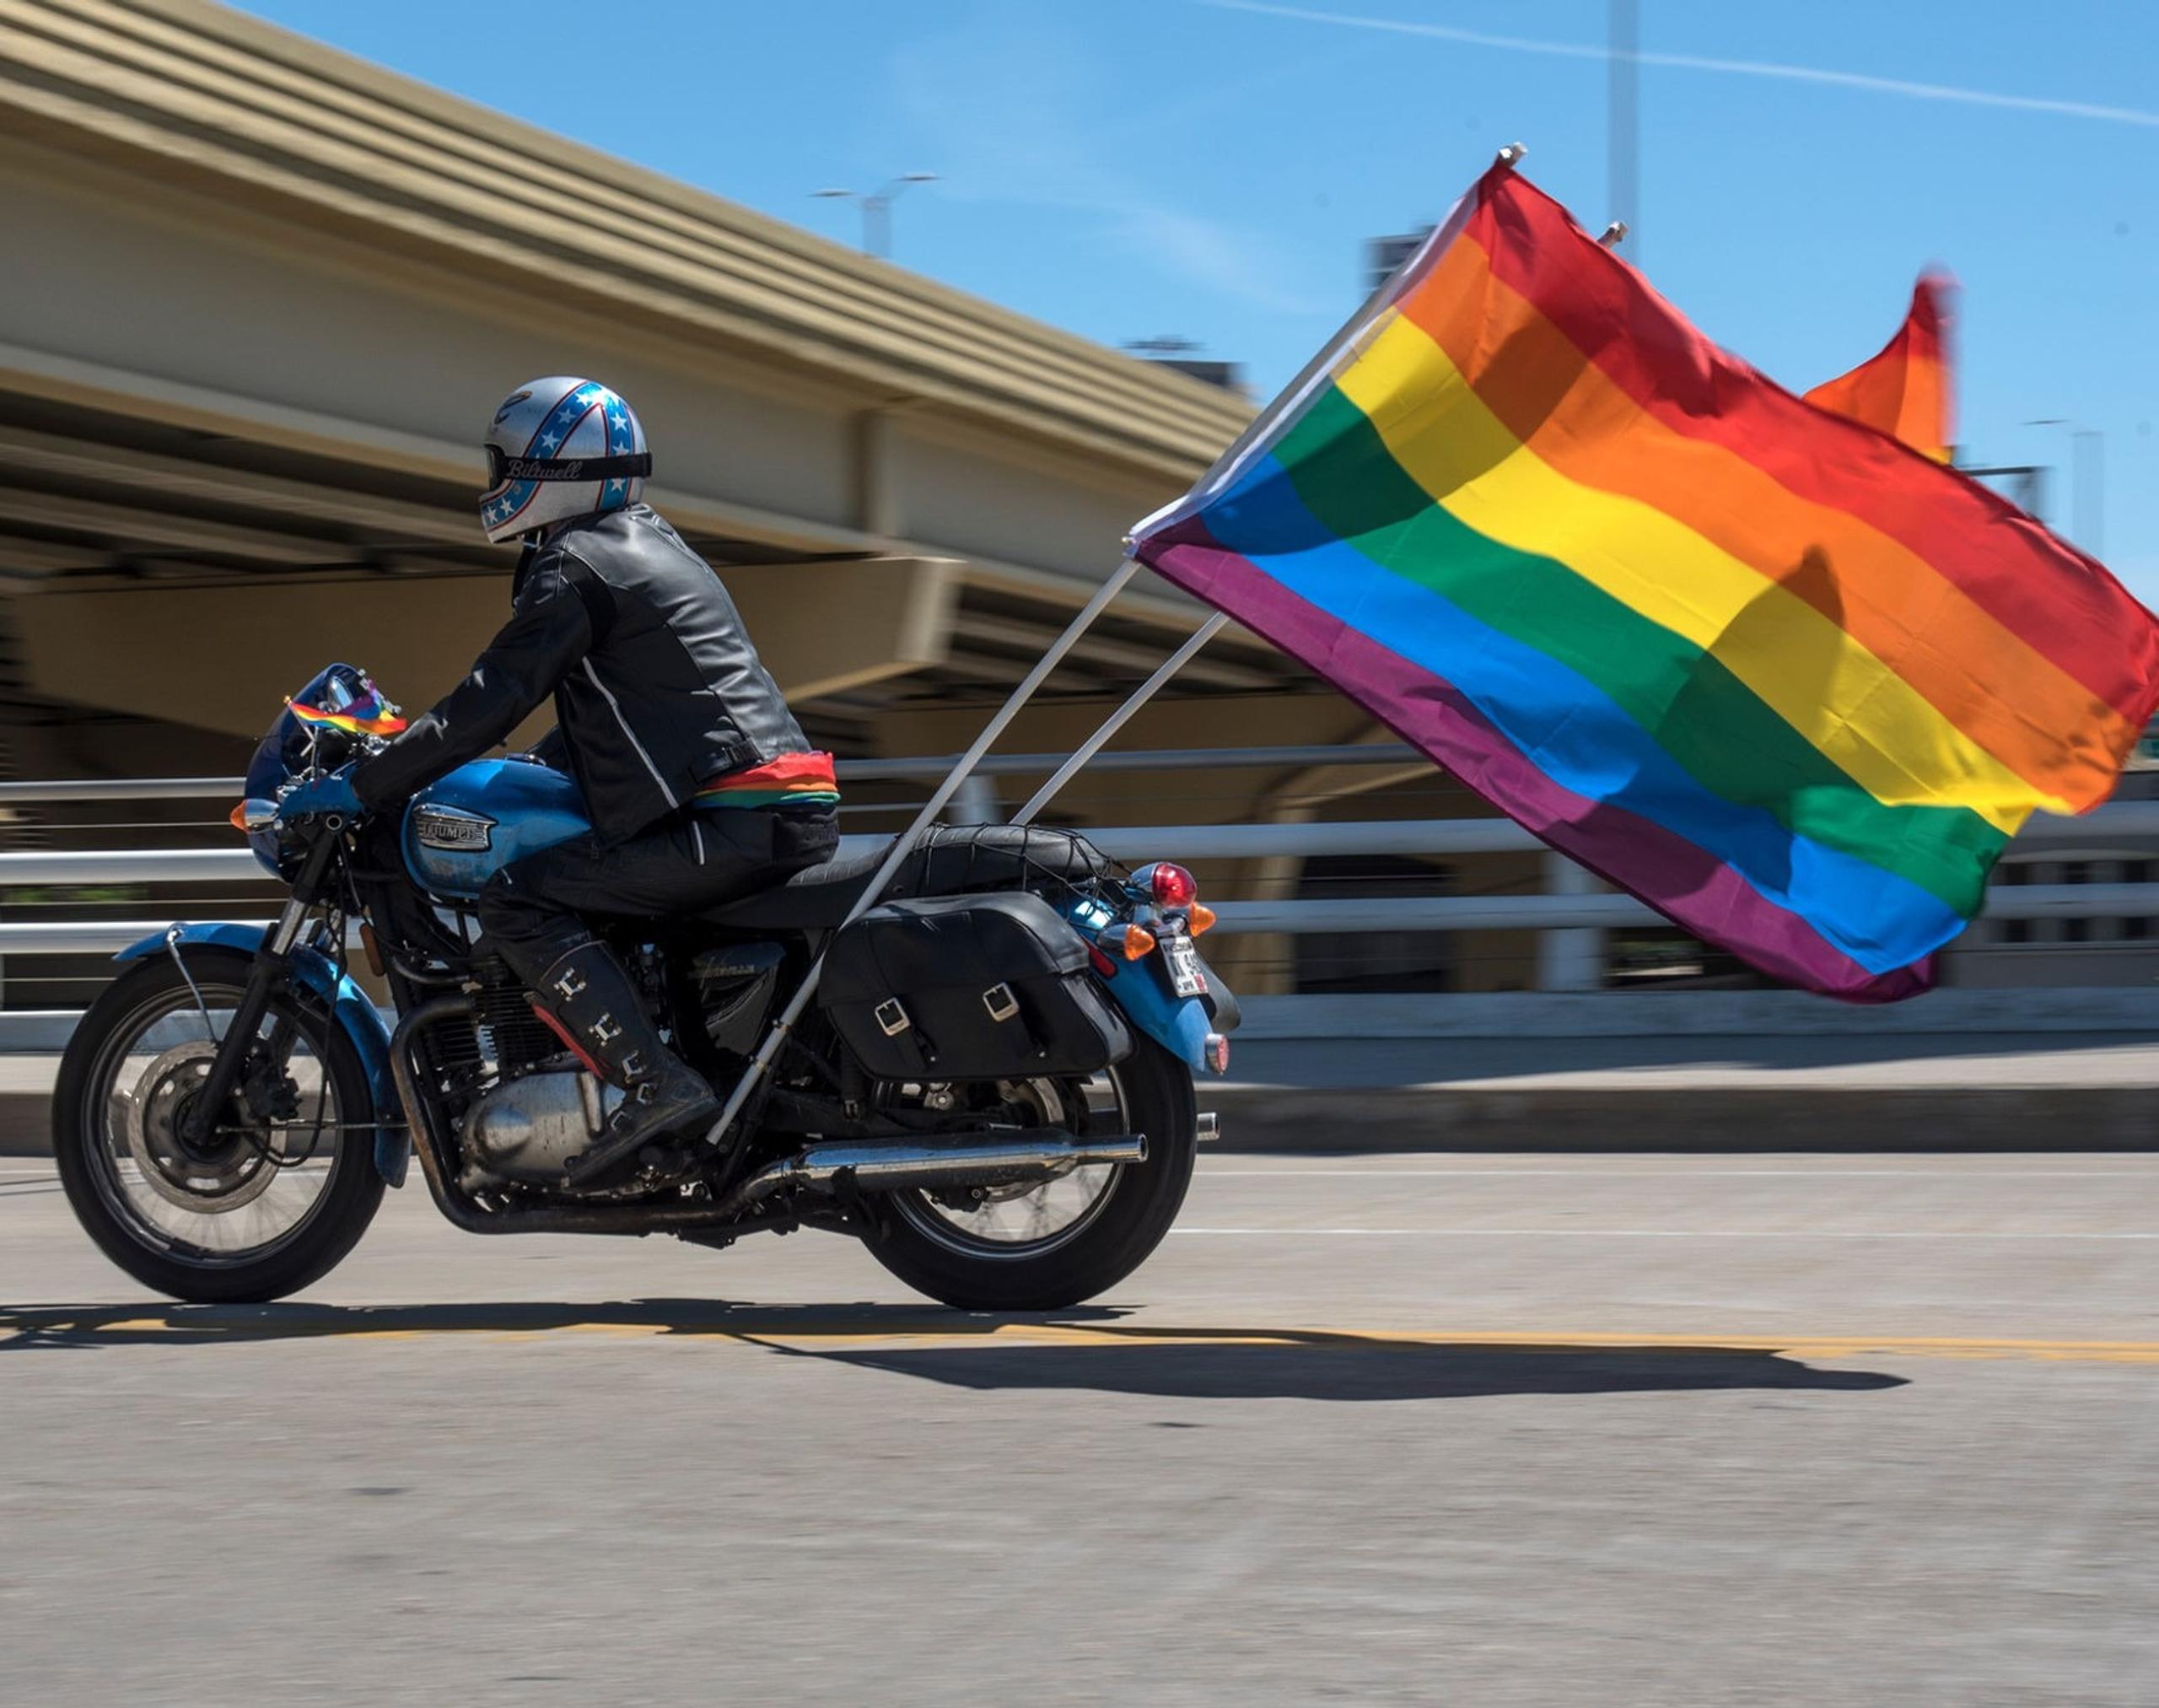 Motorcyclist on highway with two Pride flags flying from the back